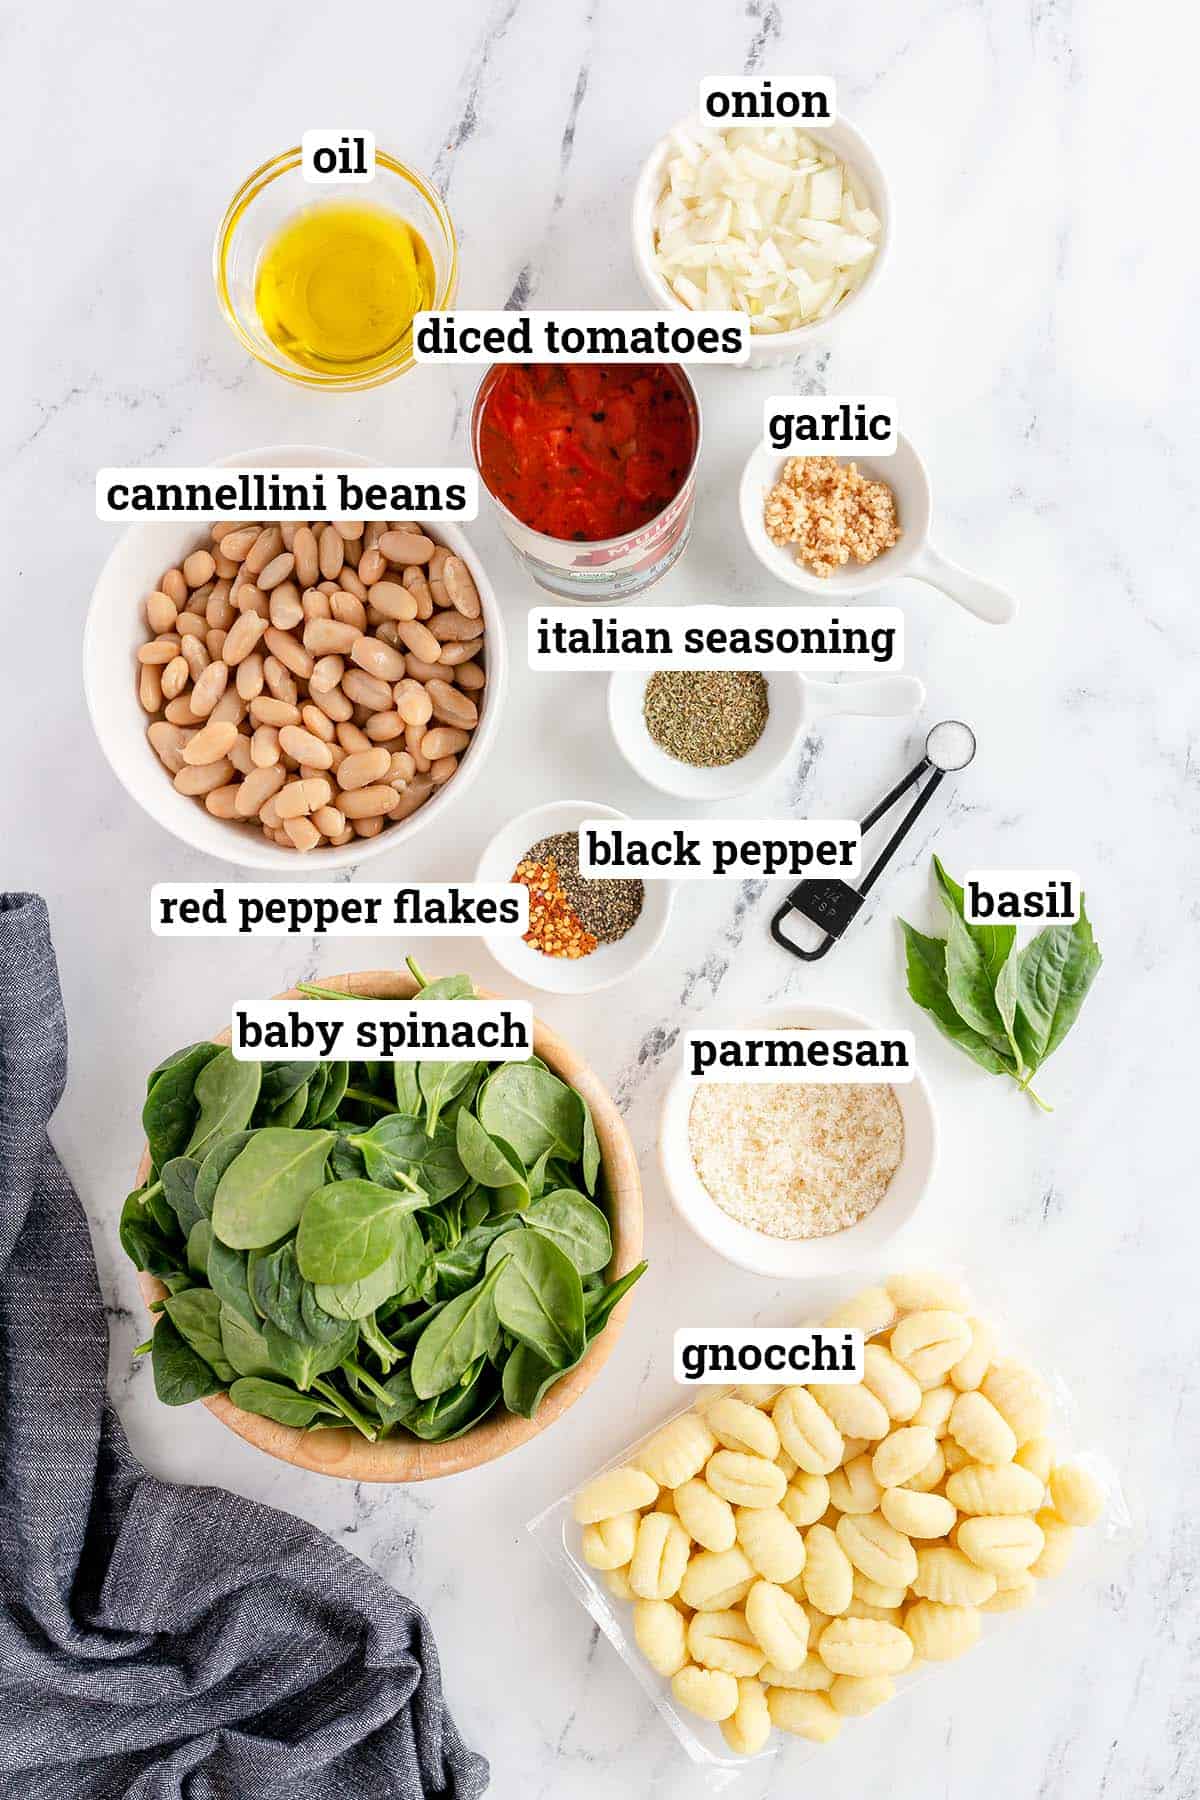 Gnocchi, cannellini beans, spinach and other ingredients with overlay text.